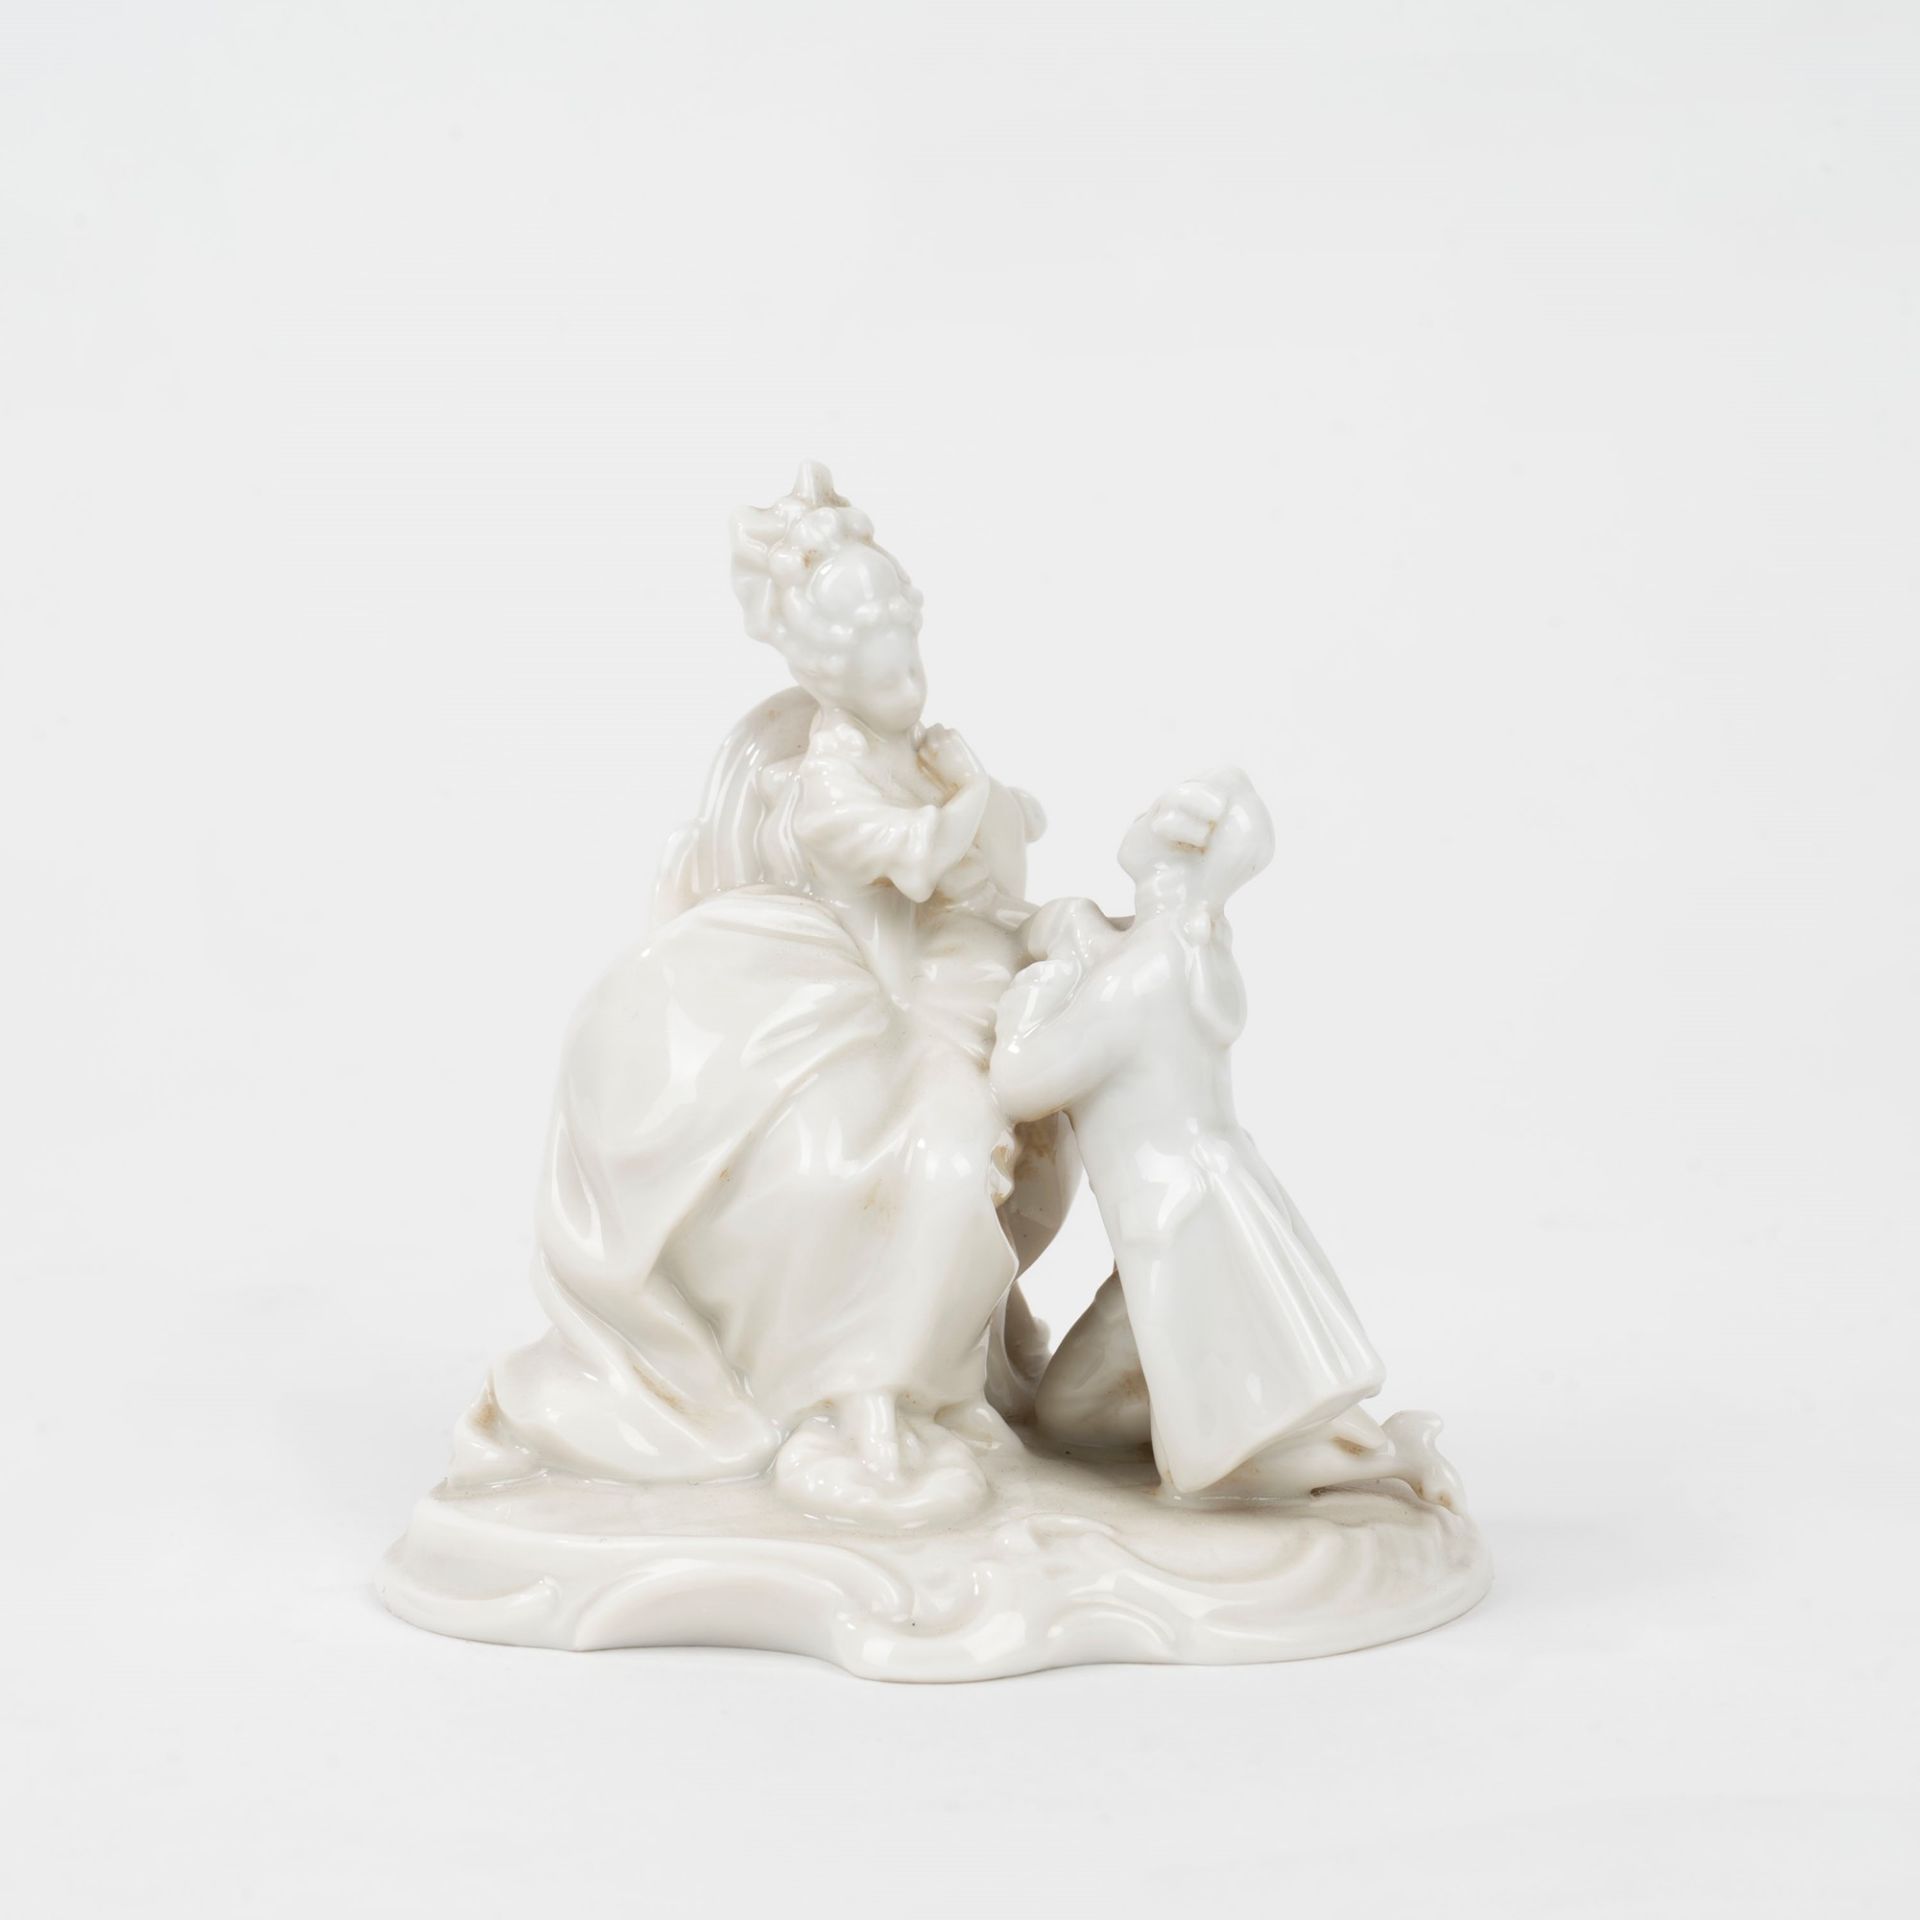 Lot consisting of seven white porcelain sculptures, 20th century - Image 9 of 10